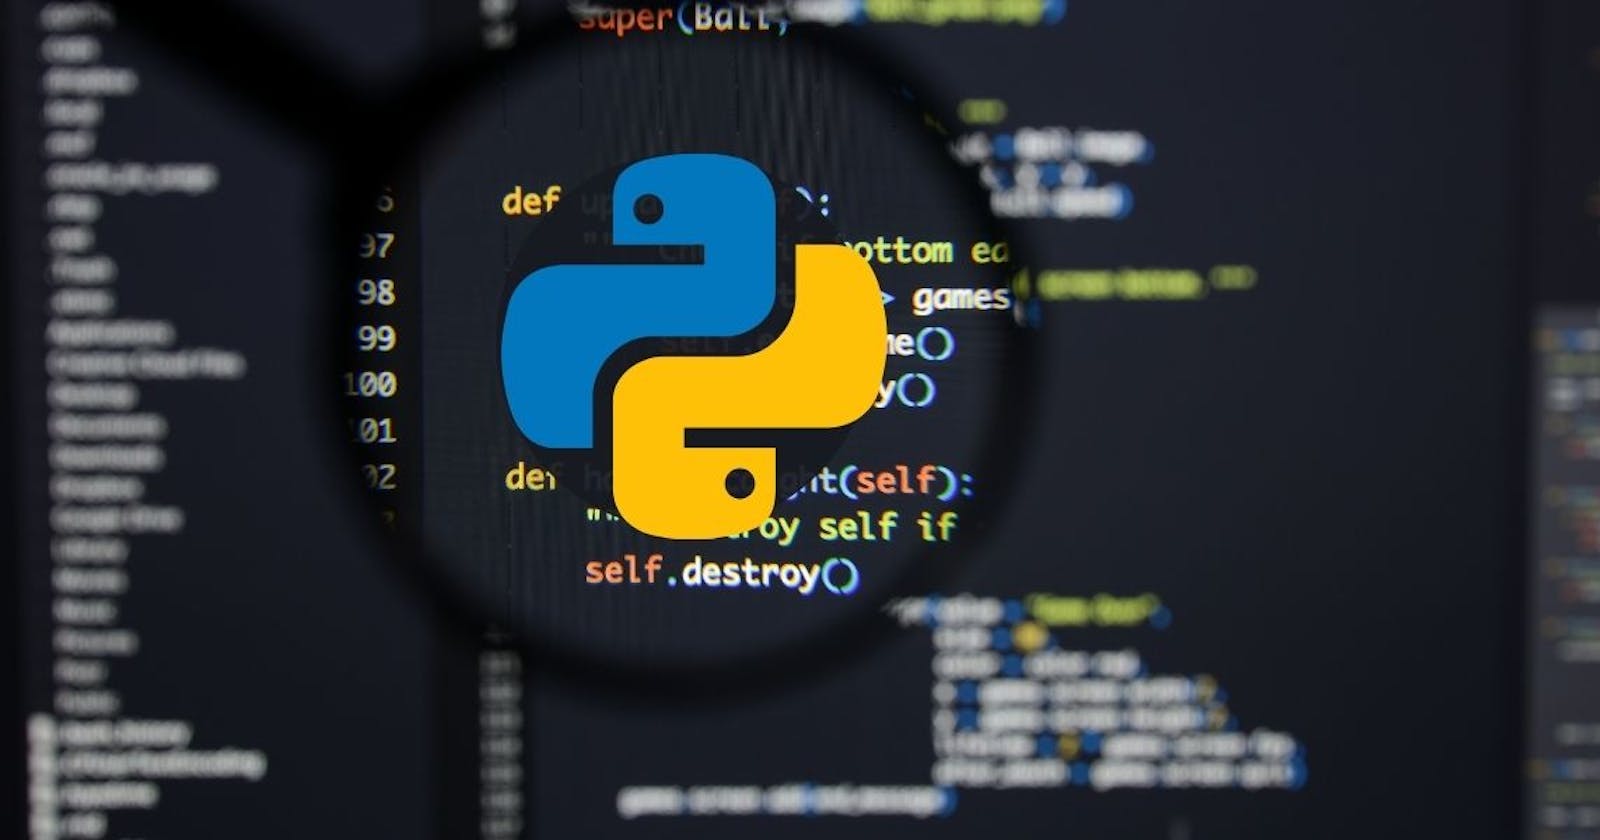 Getting Started with Pytest: The Python Testing
Framework